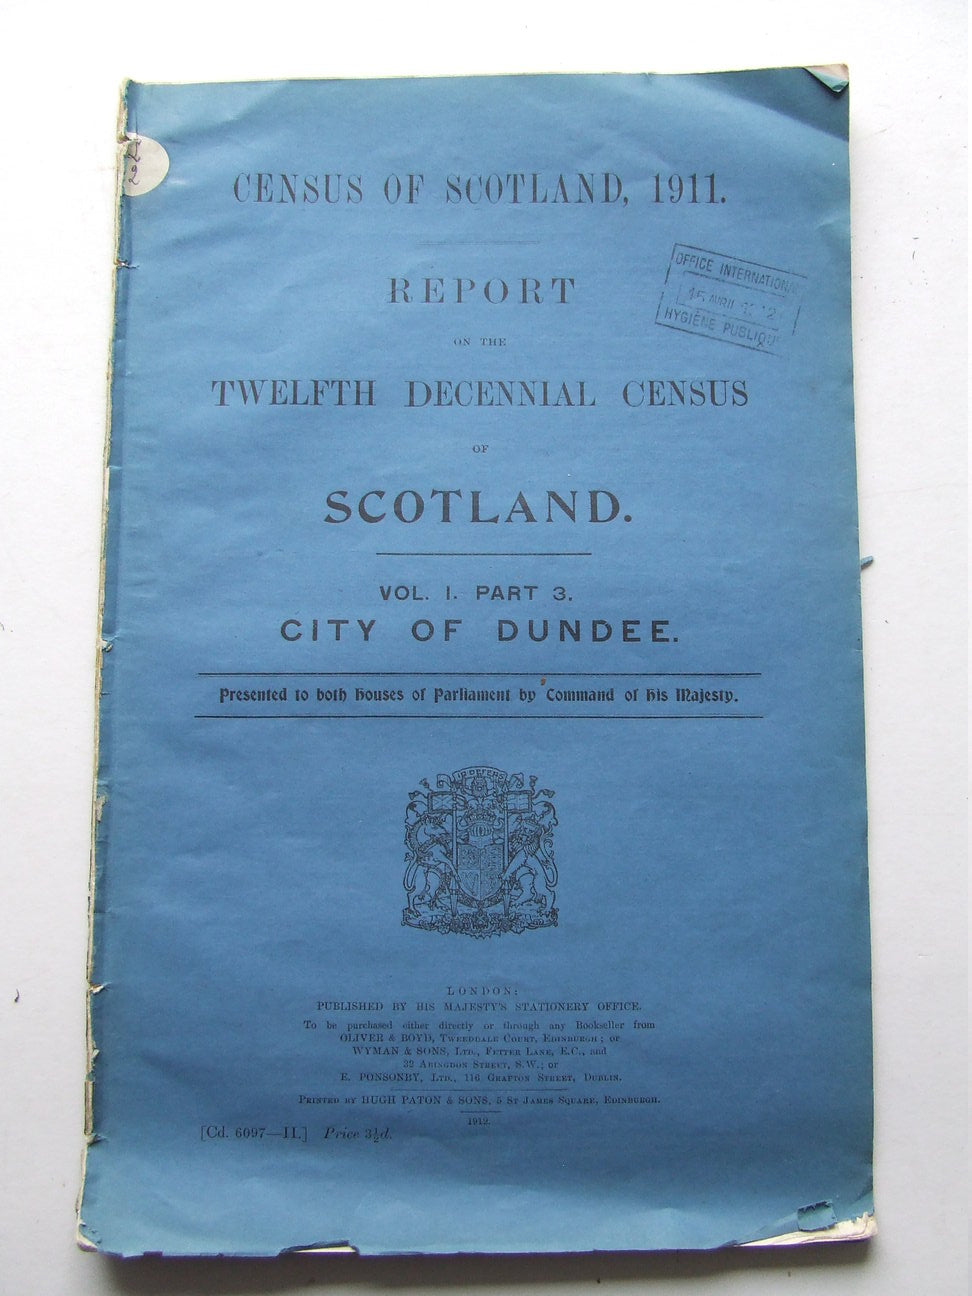 Report on the Twelfth Decennial Census of Scotland [1911].....City of Dundee